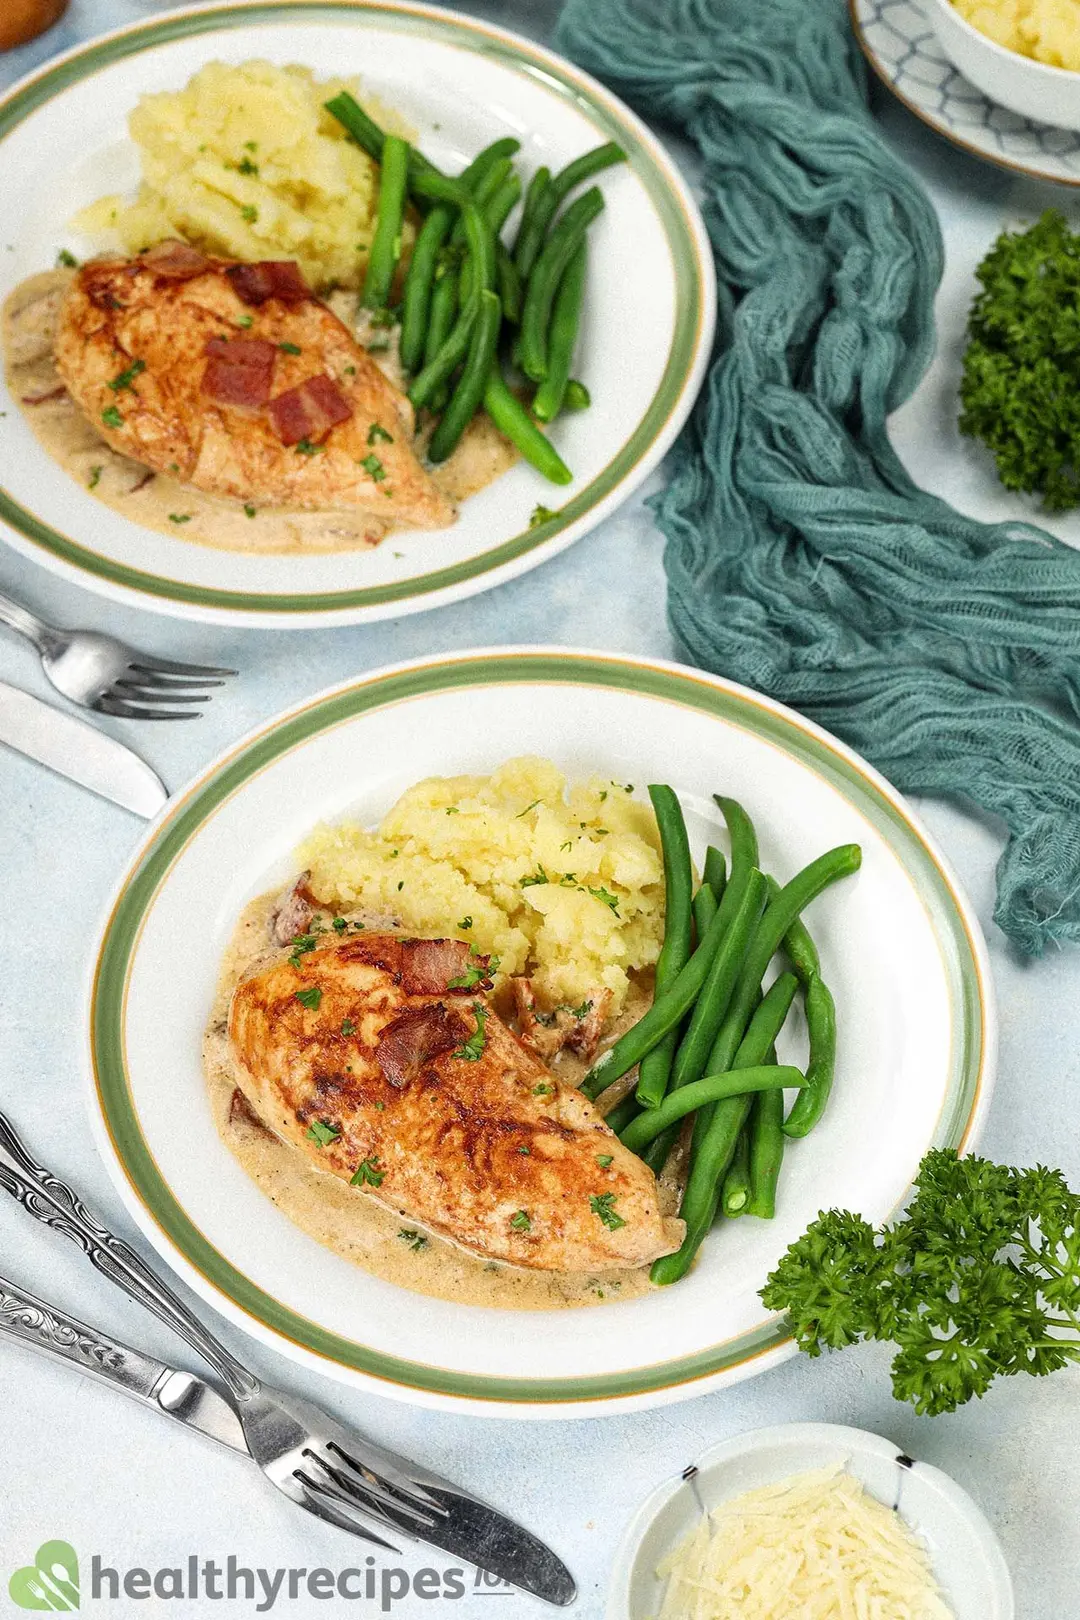 Two plates of cooked chicken breast, mashed potatoes, and green beans decorated by forks, dinner knives, and a peacock blue mesh cloth